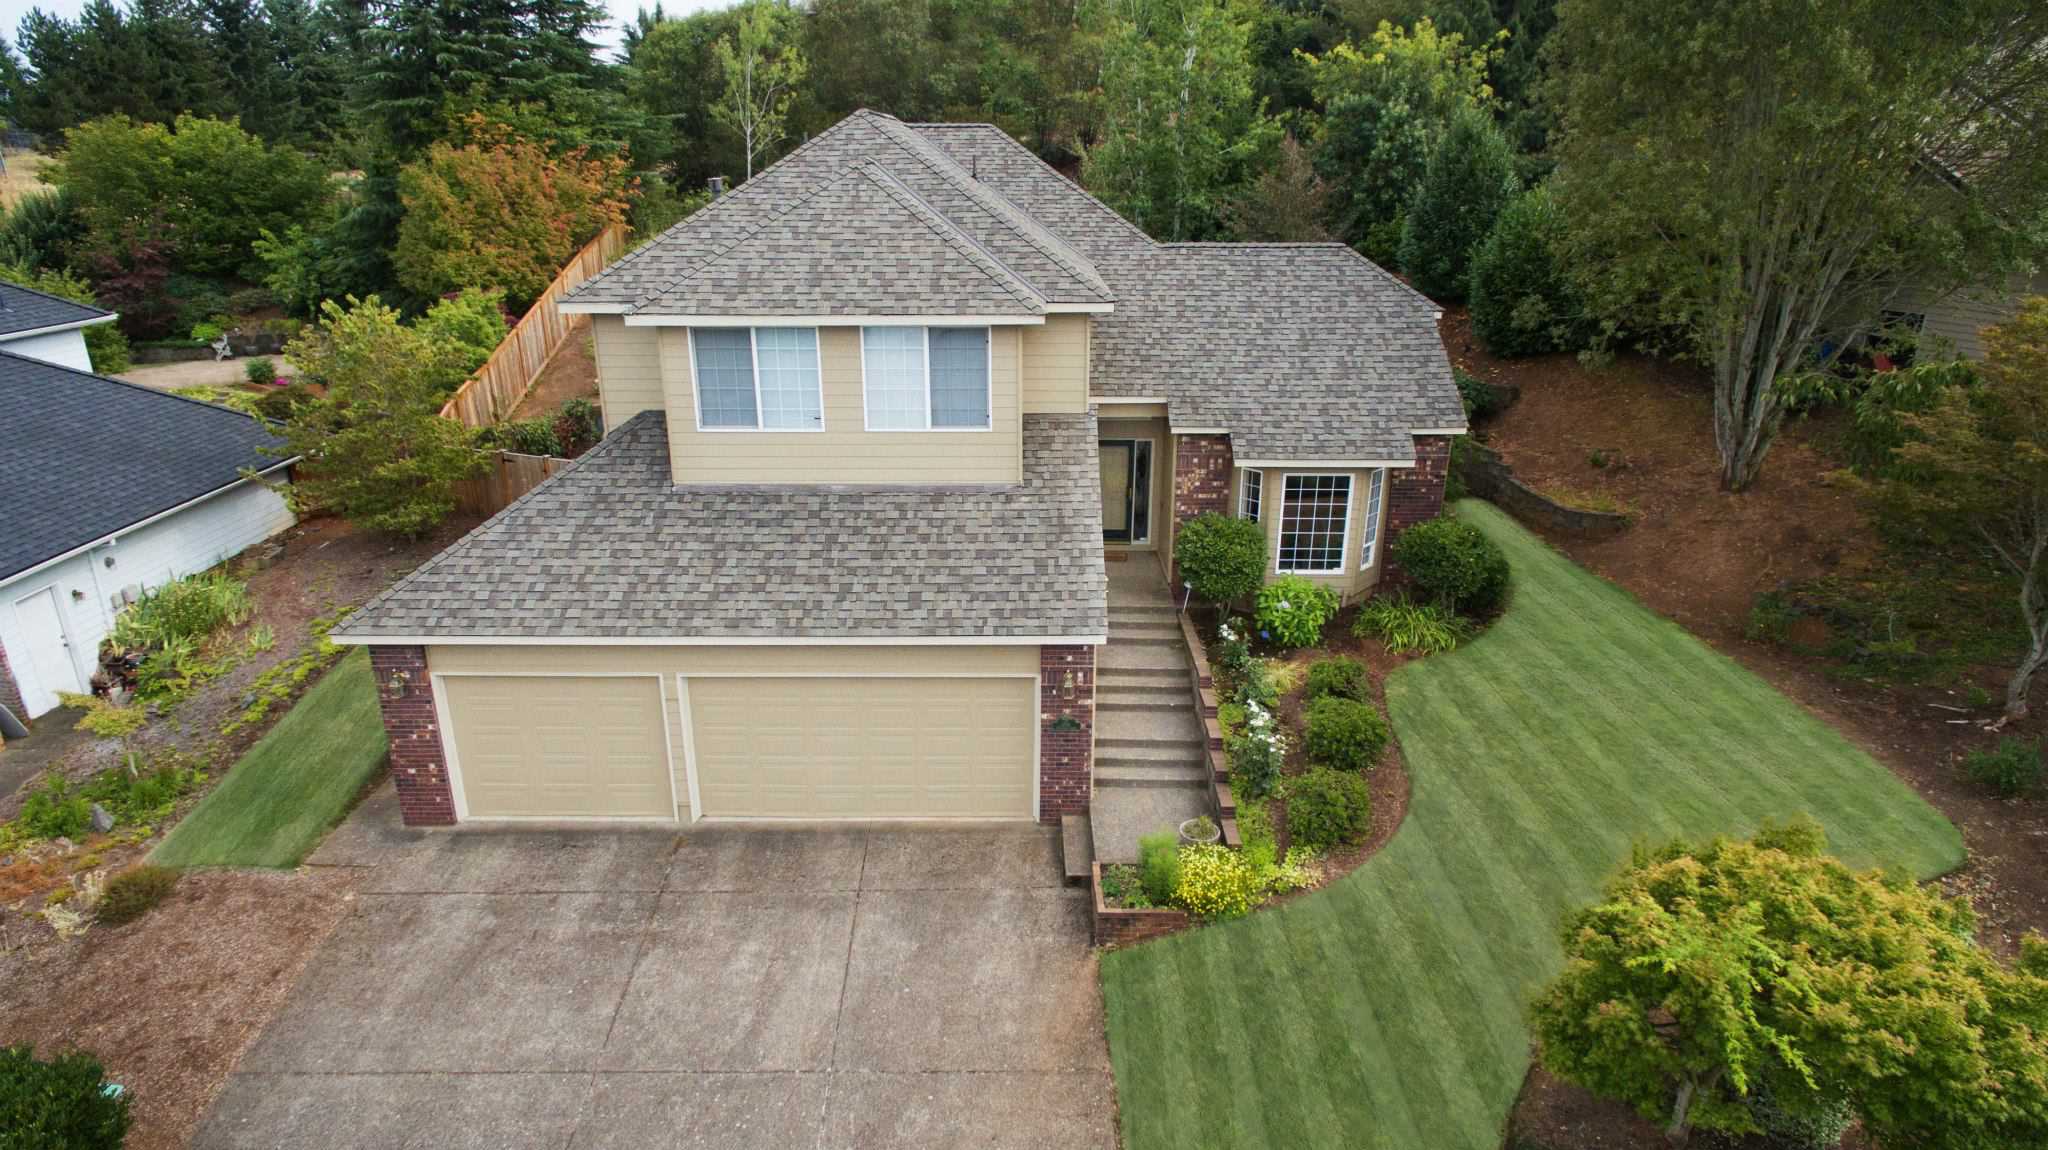 A roof that was done by Valley Rooing in Salem, Oregon